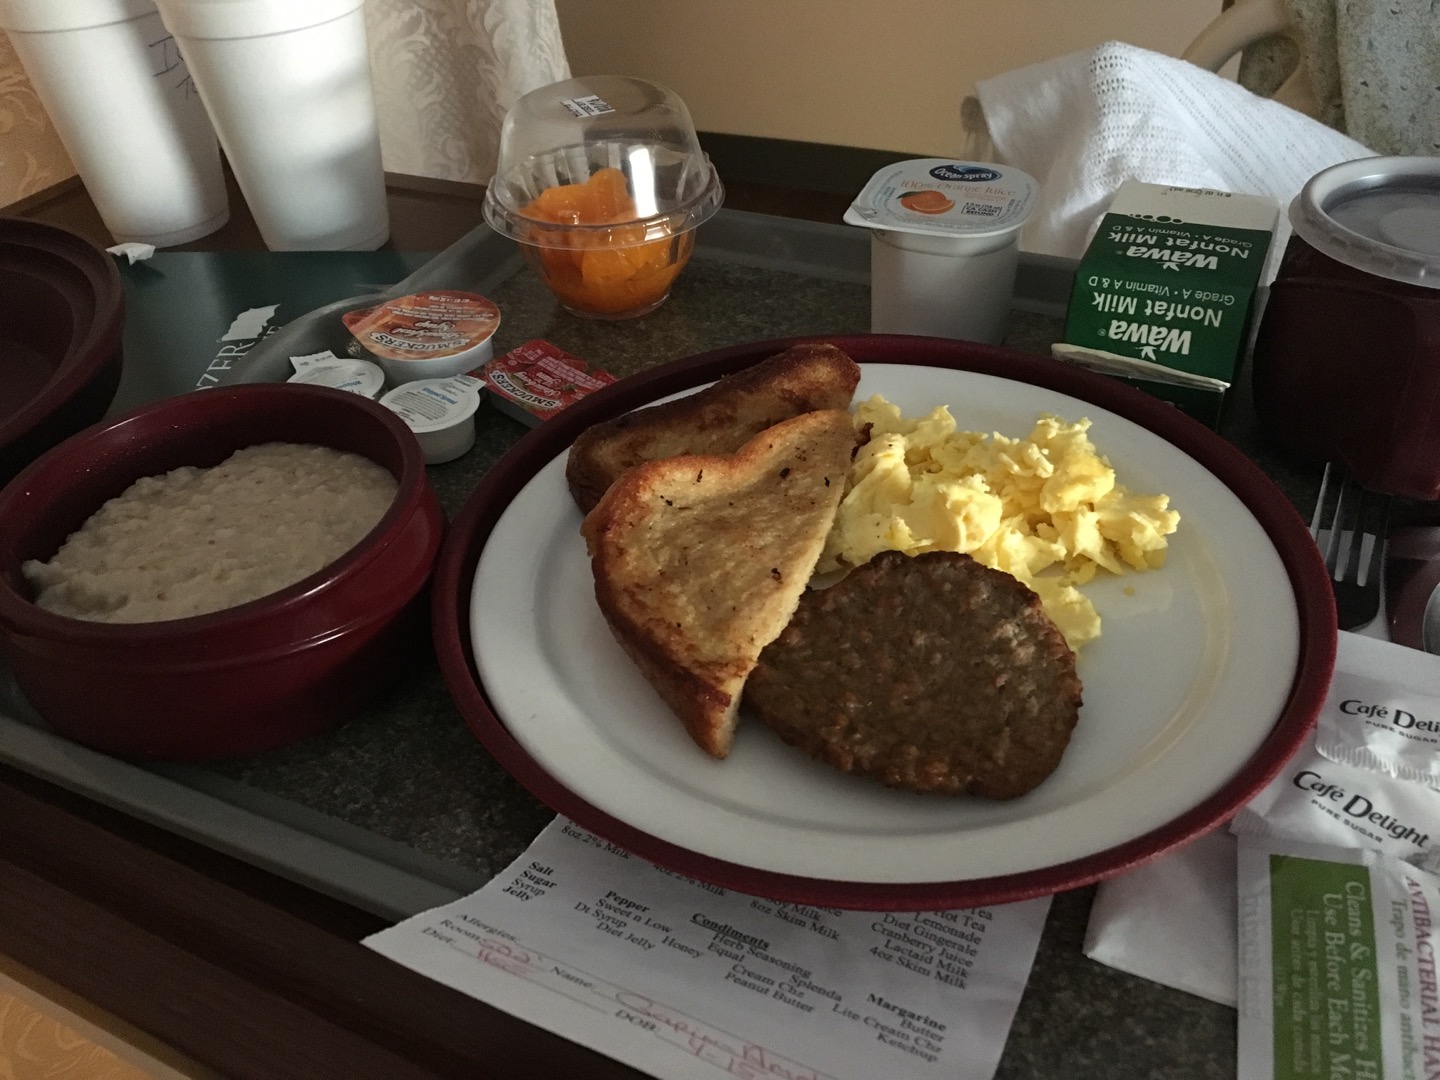 French toast, scrambled eggs, sausage, and oatmeal!